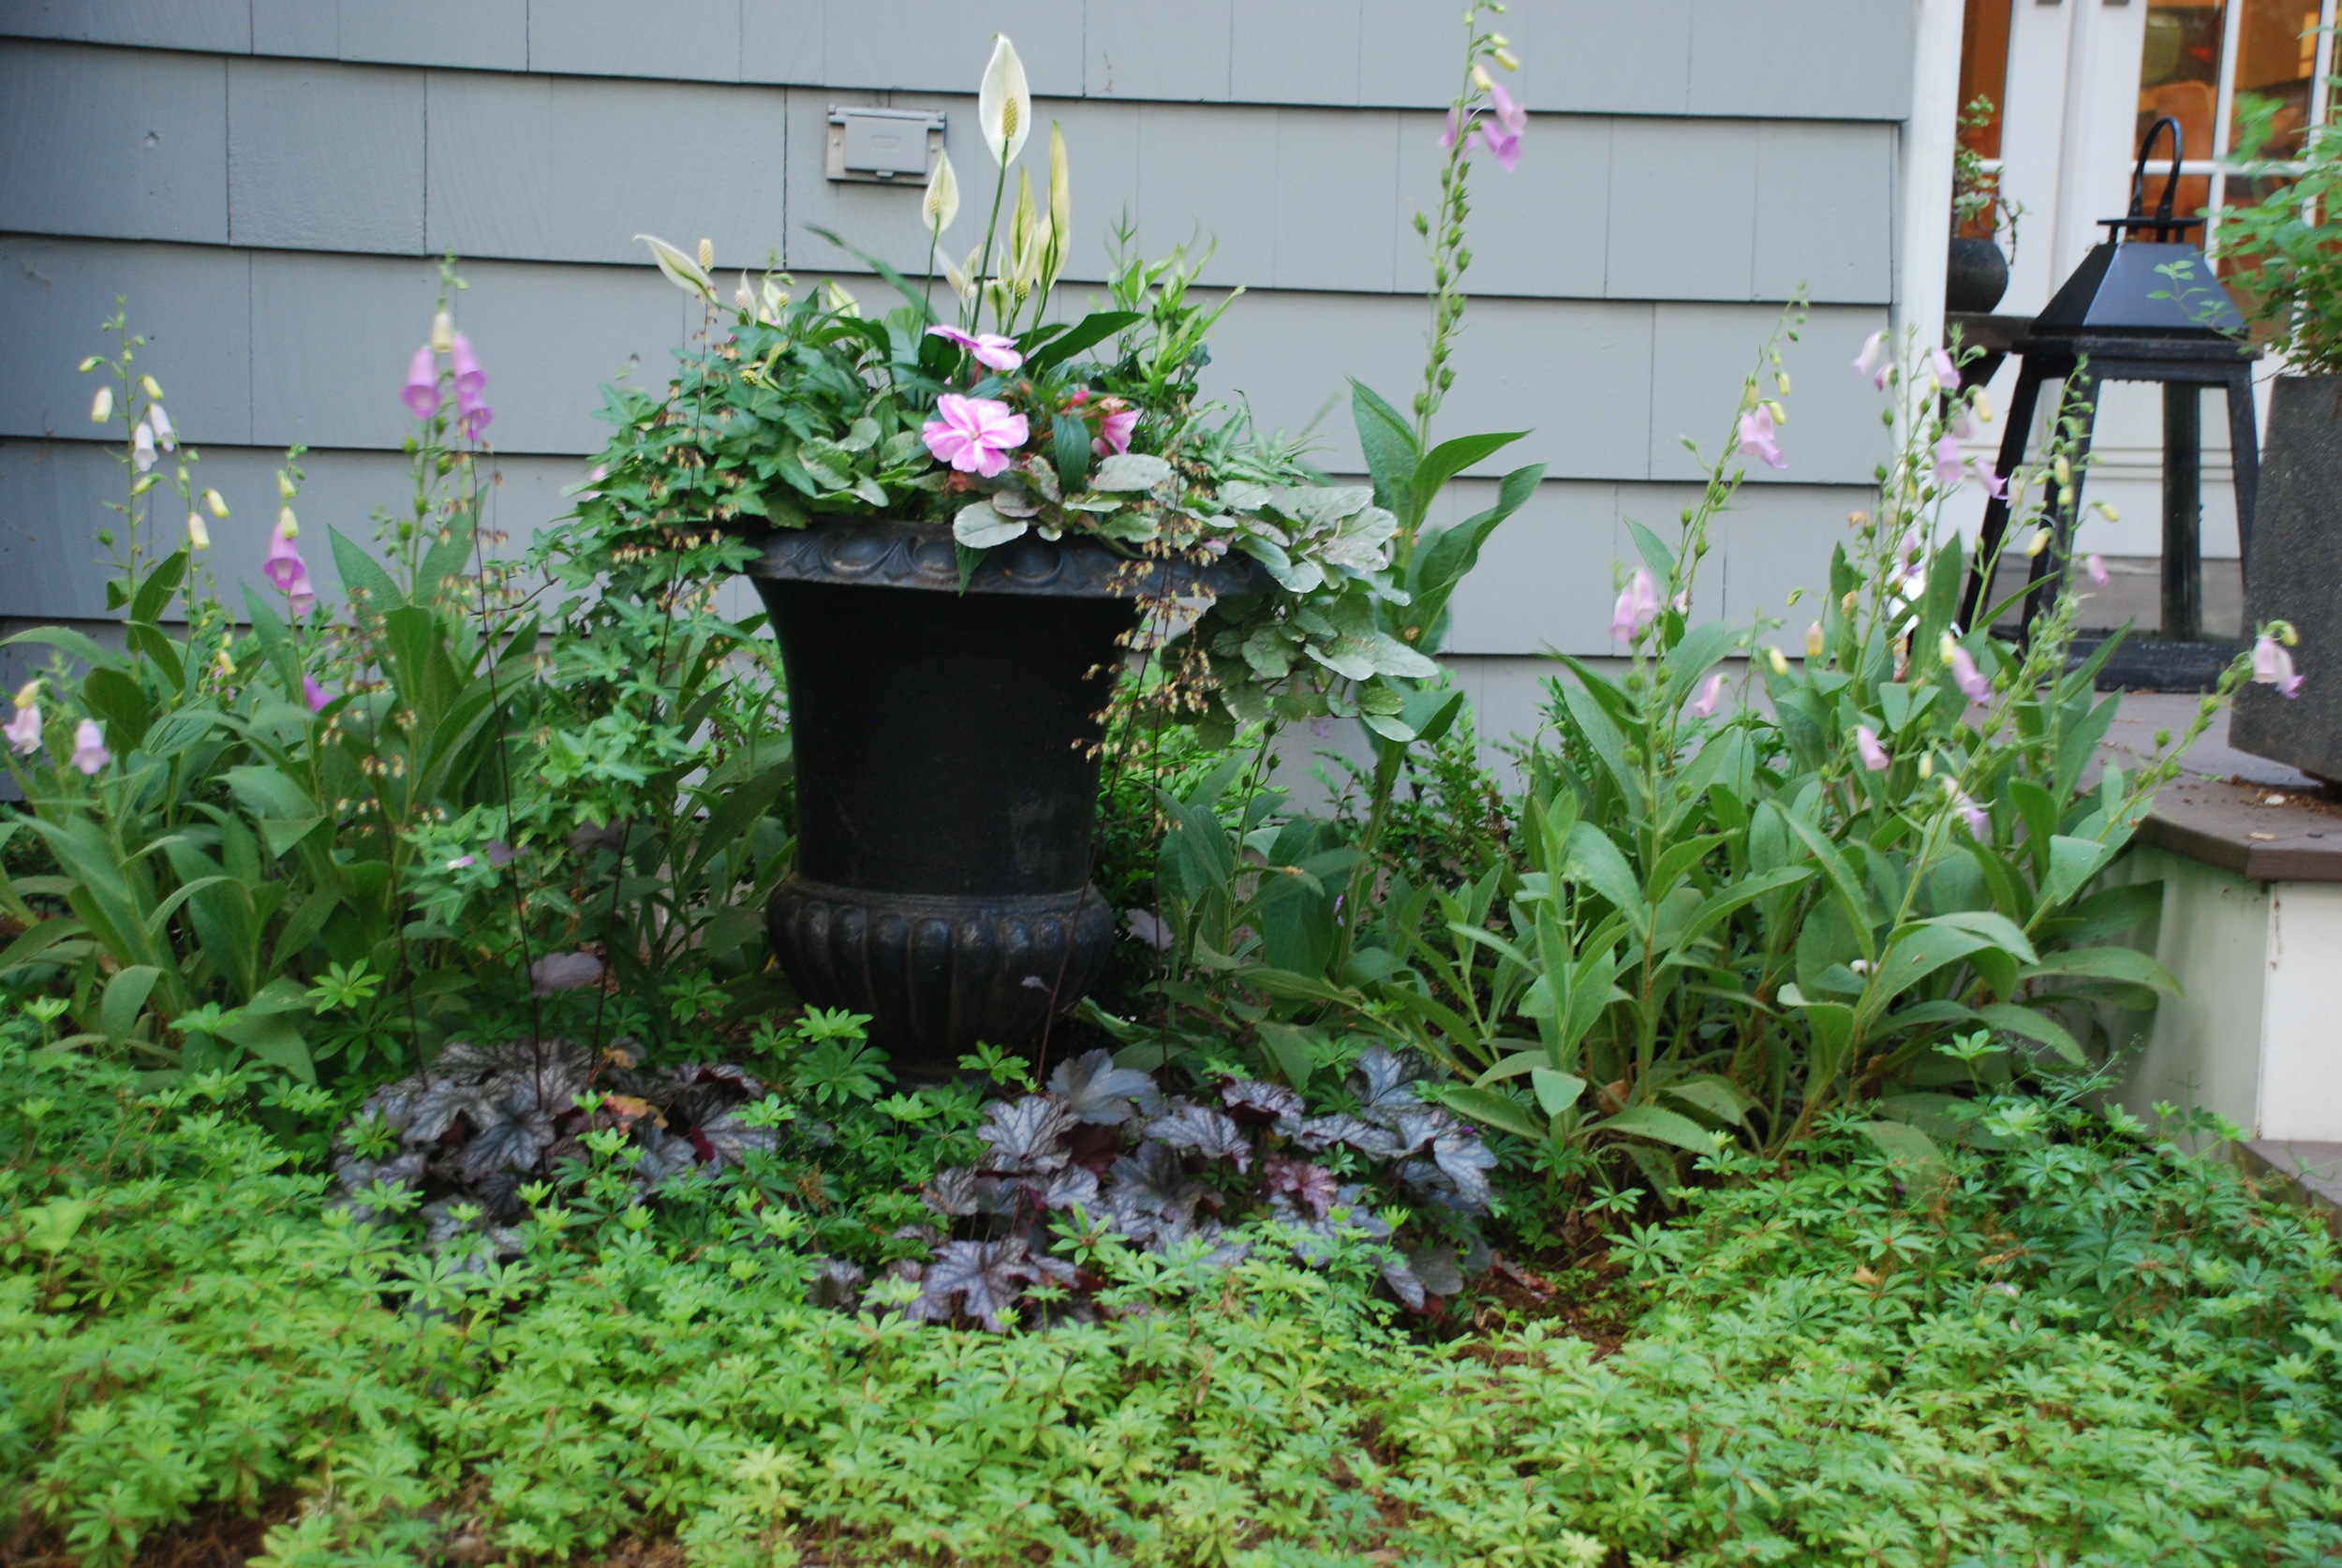 Sunny small garden with digitalis and a decorative urn